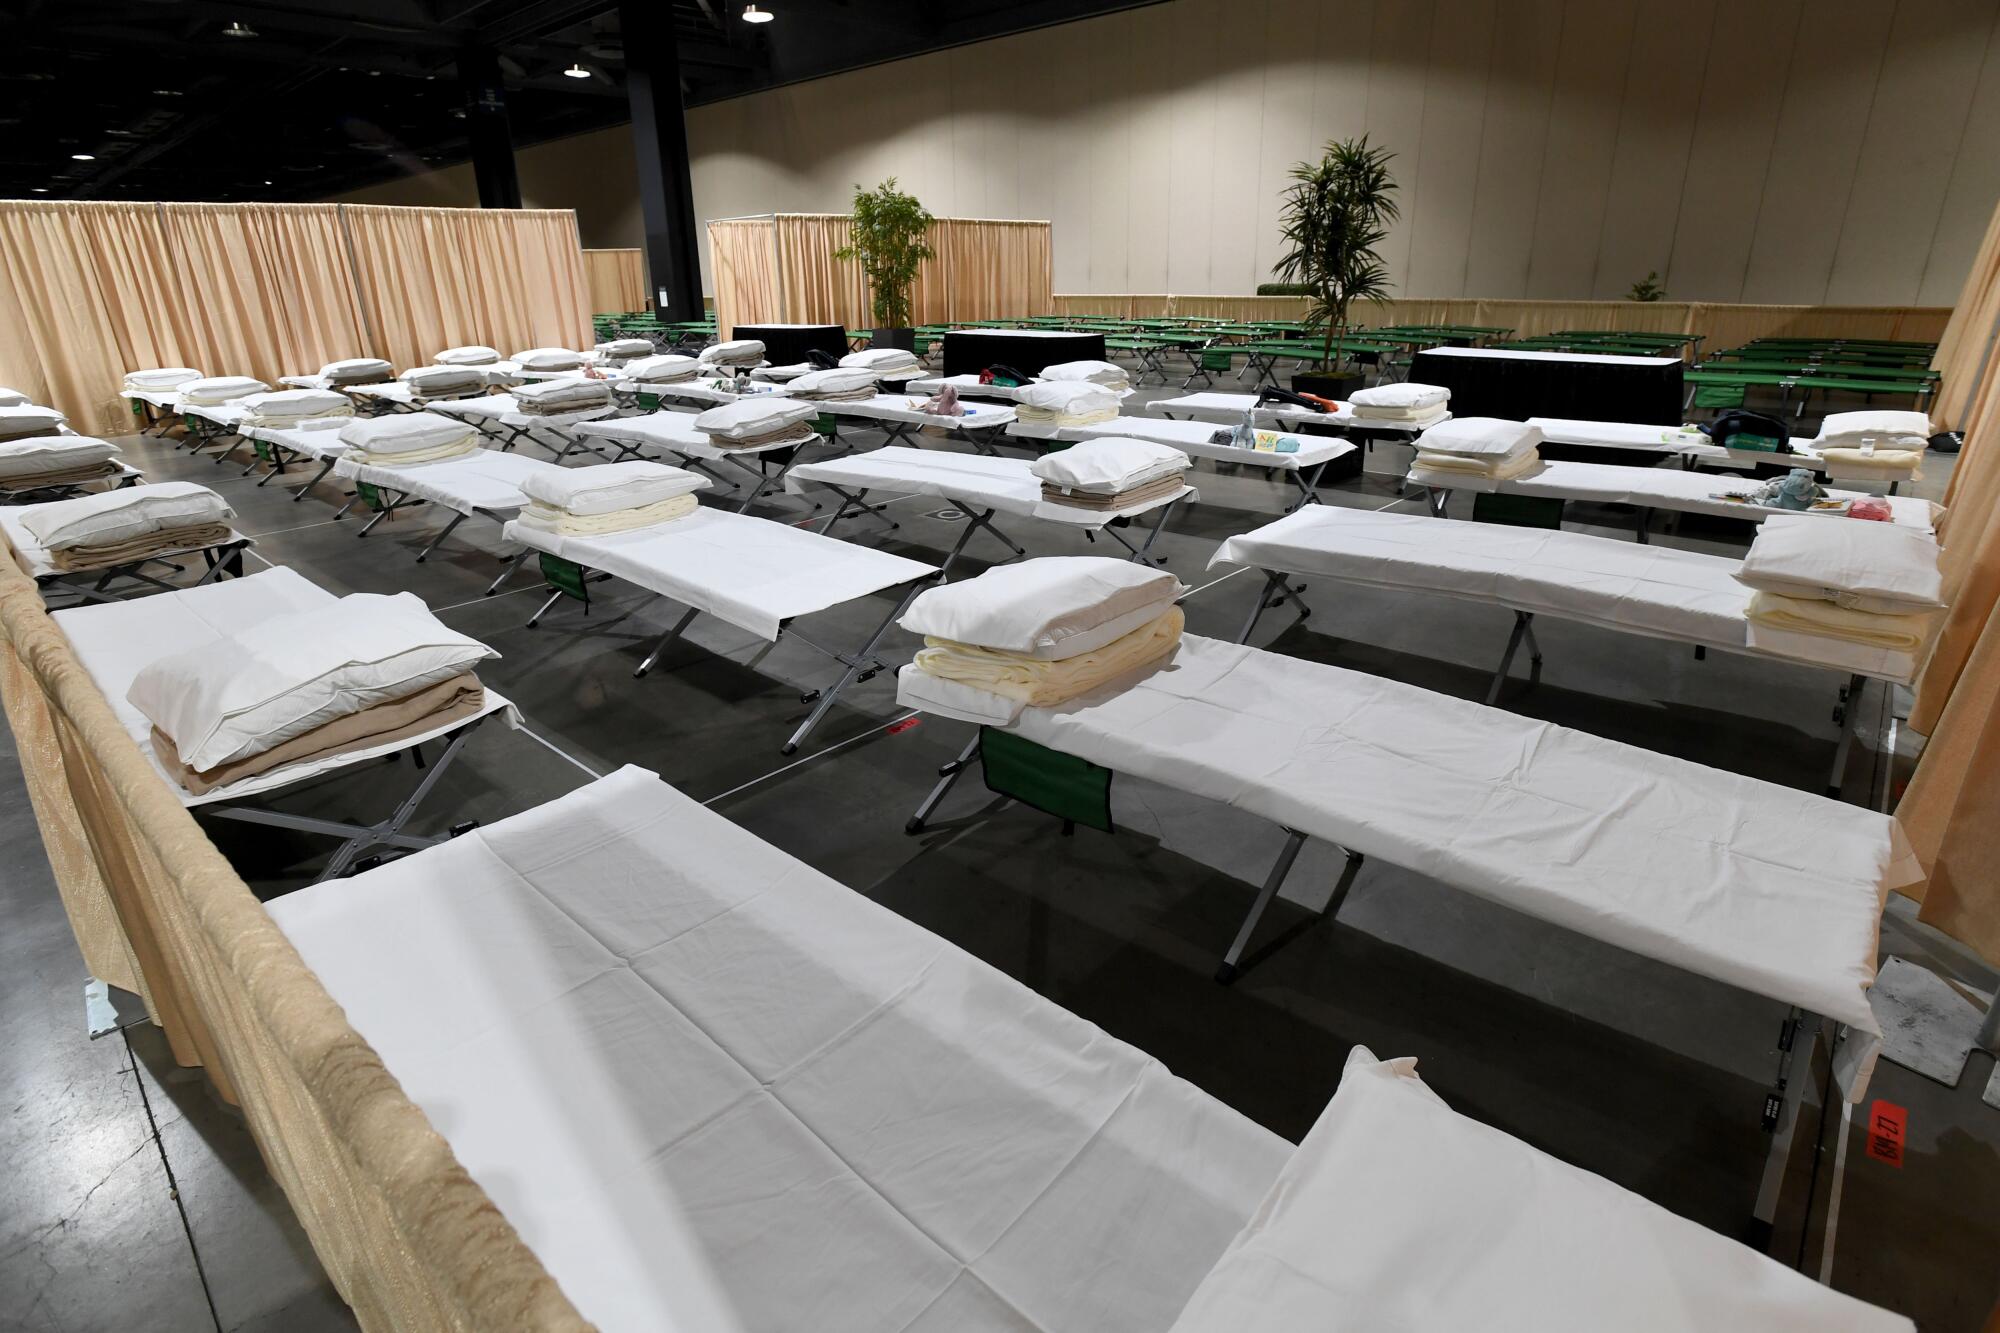 Rows of cots with pillows and blankets